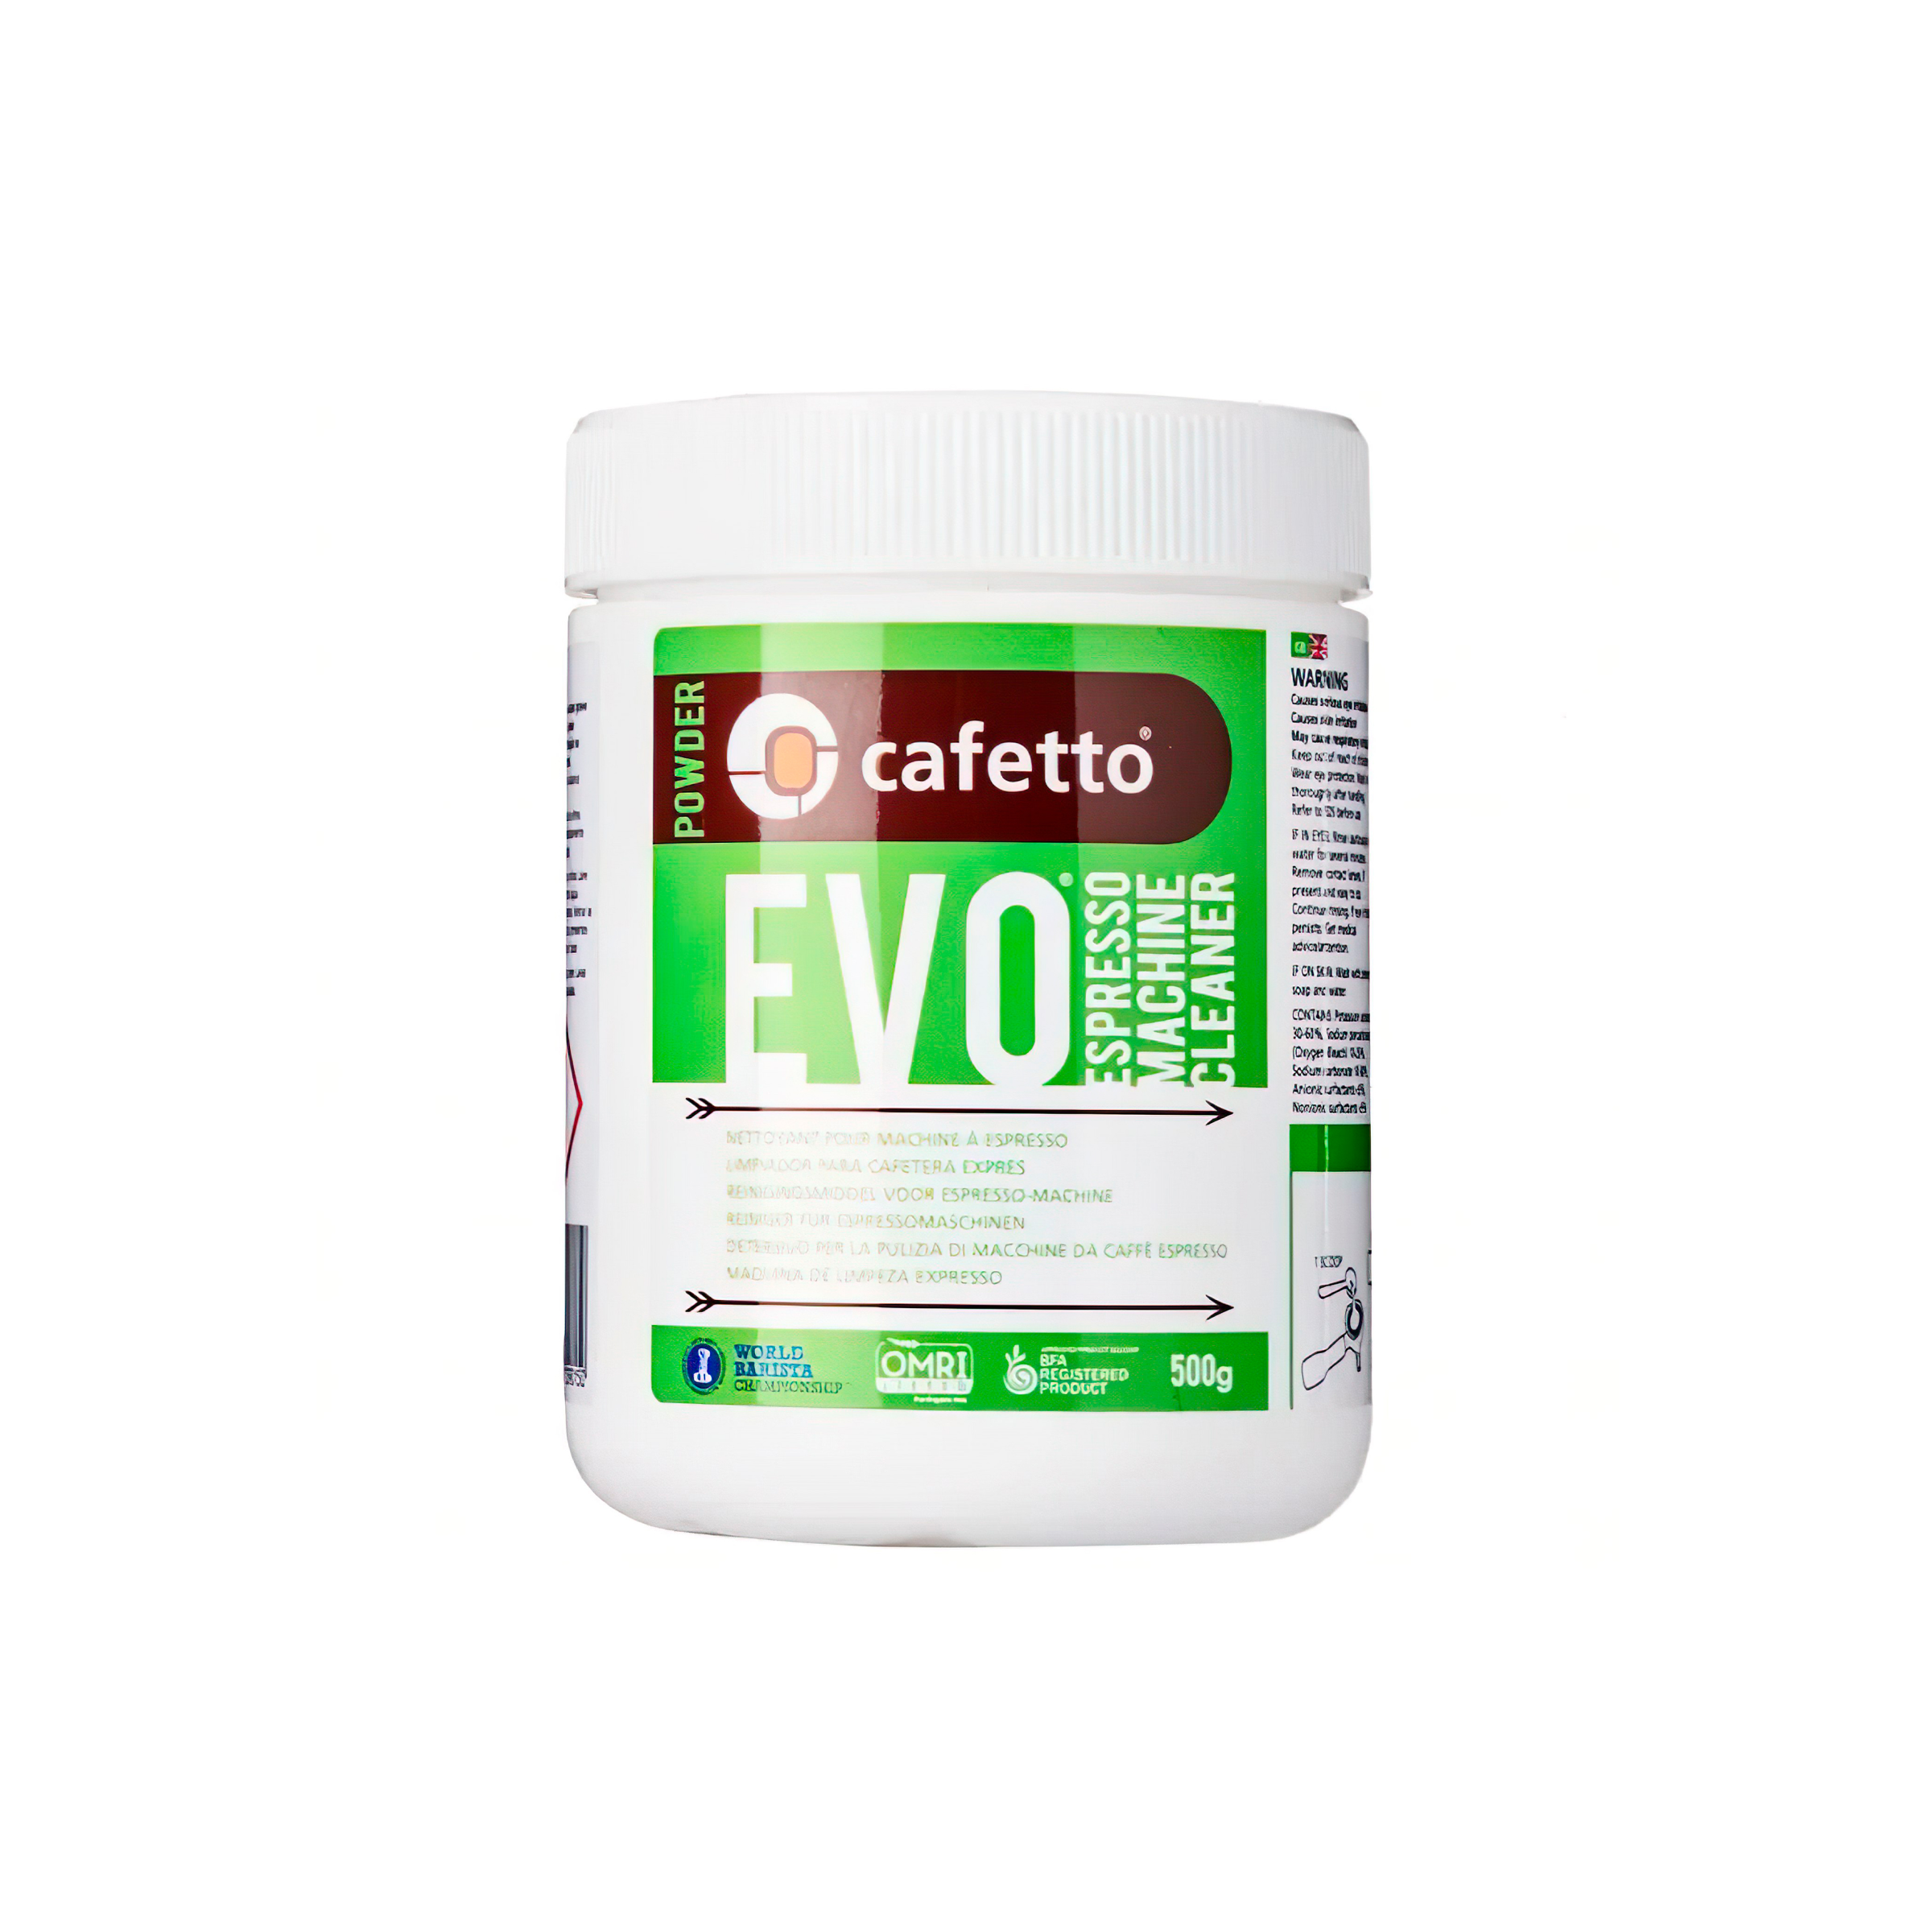 Cafetto Evo Organic Cleaner - 500gm